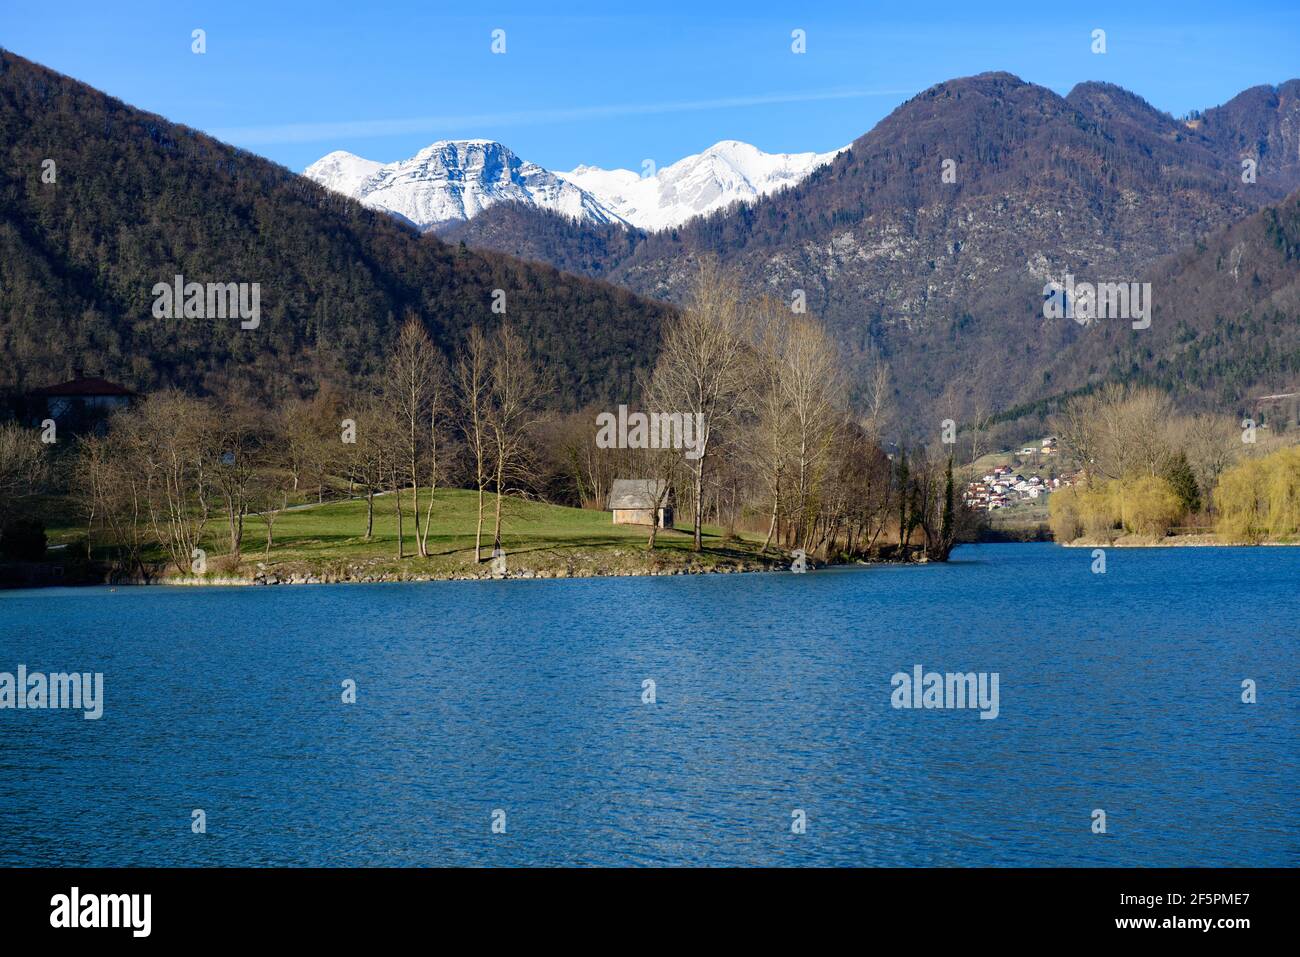 Mountains and turquoise water in Most na Soci, Slovenia Stock Photo